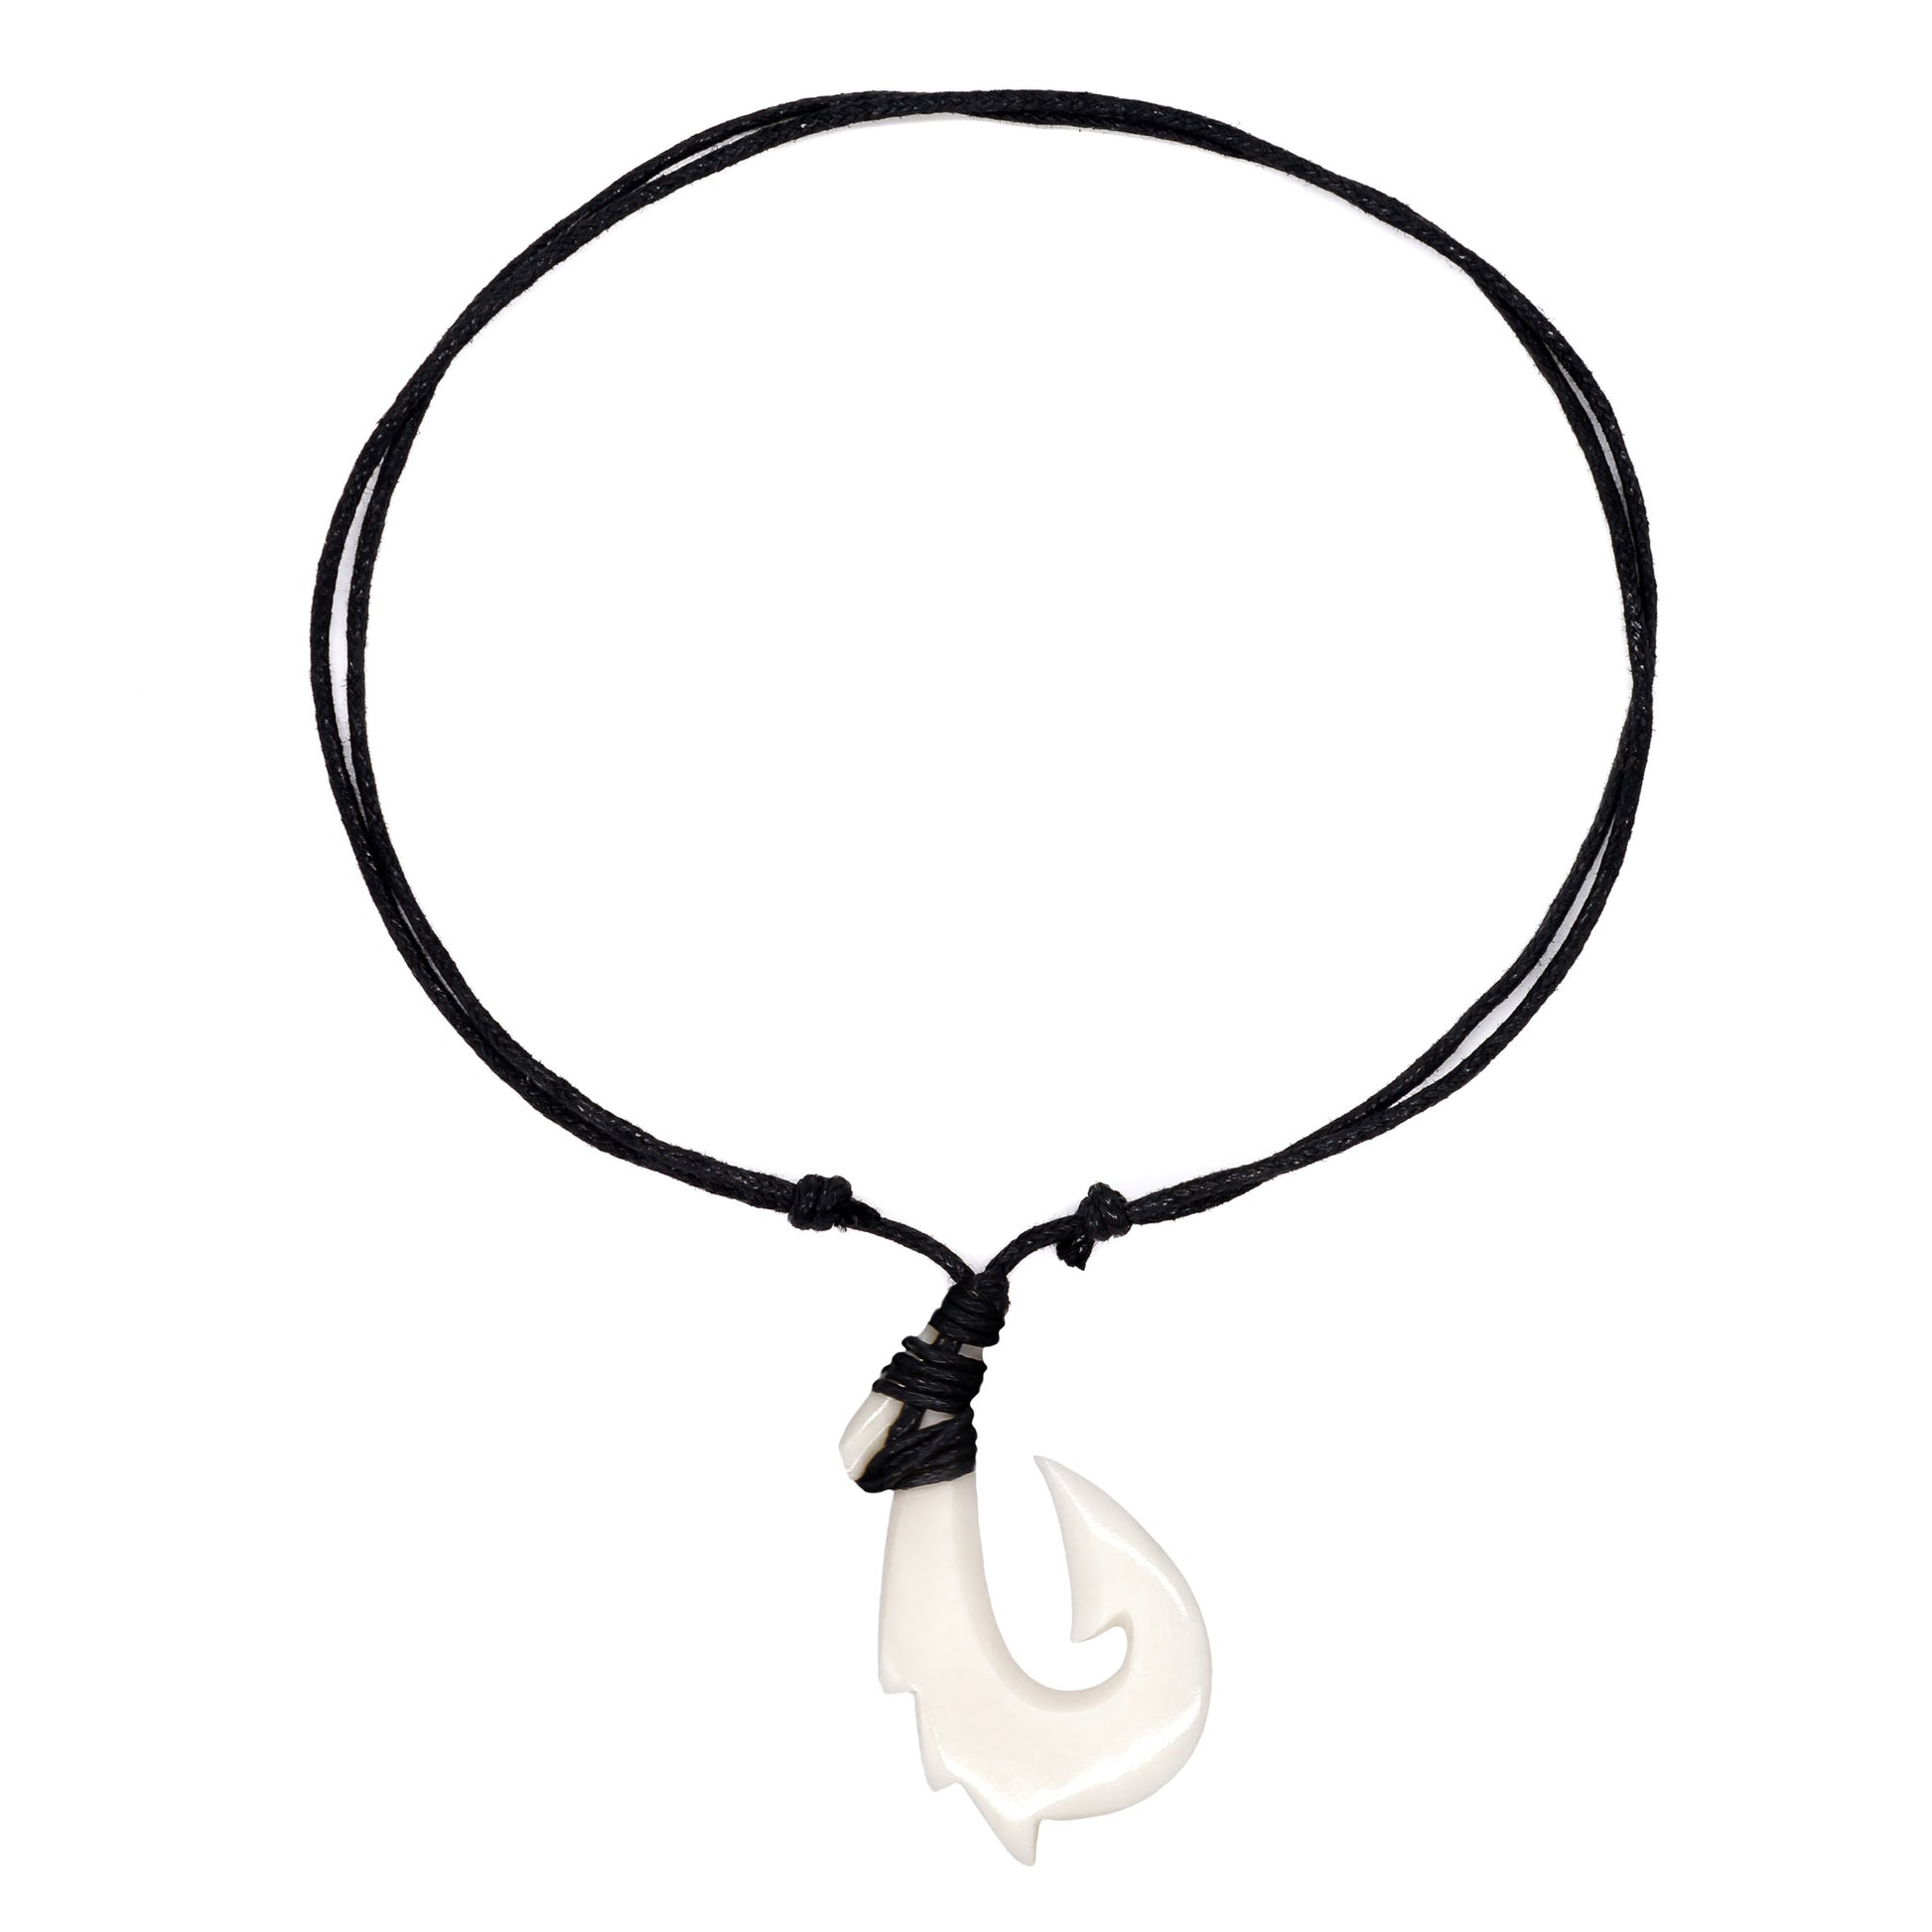 Necklace Black Cord With Wooden Fish Bone